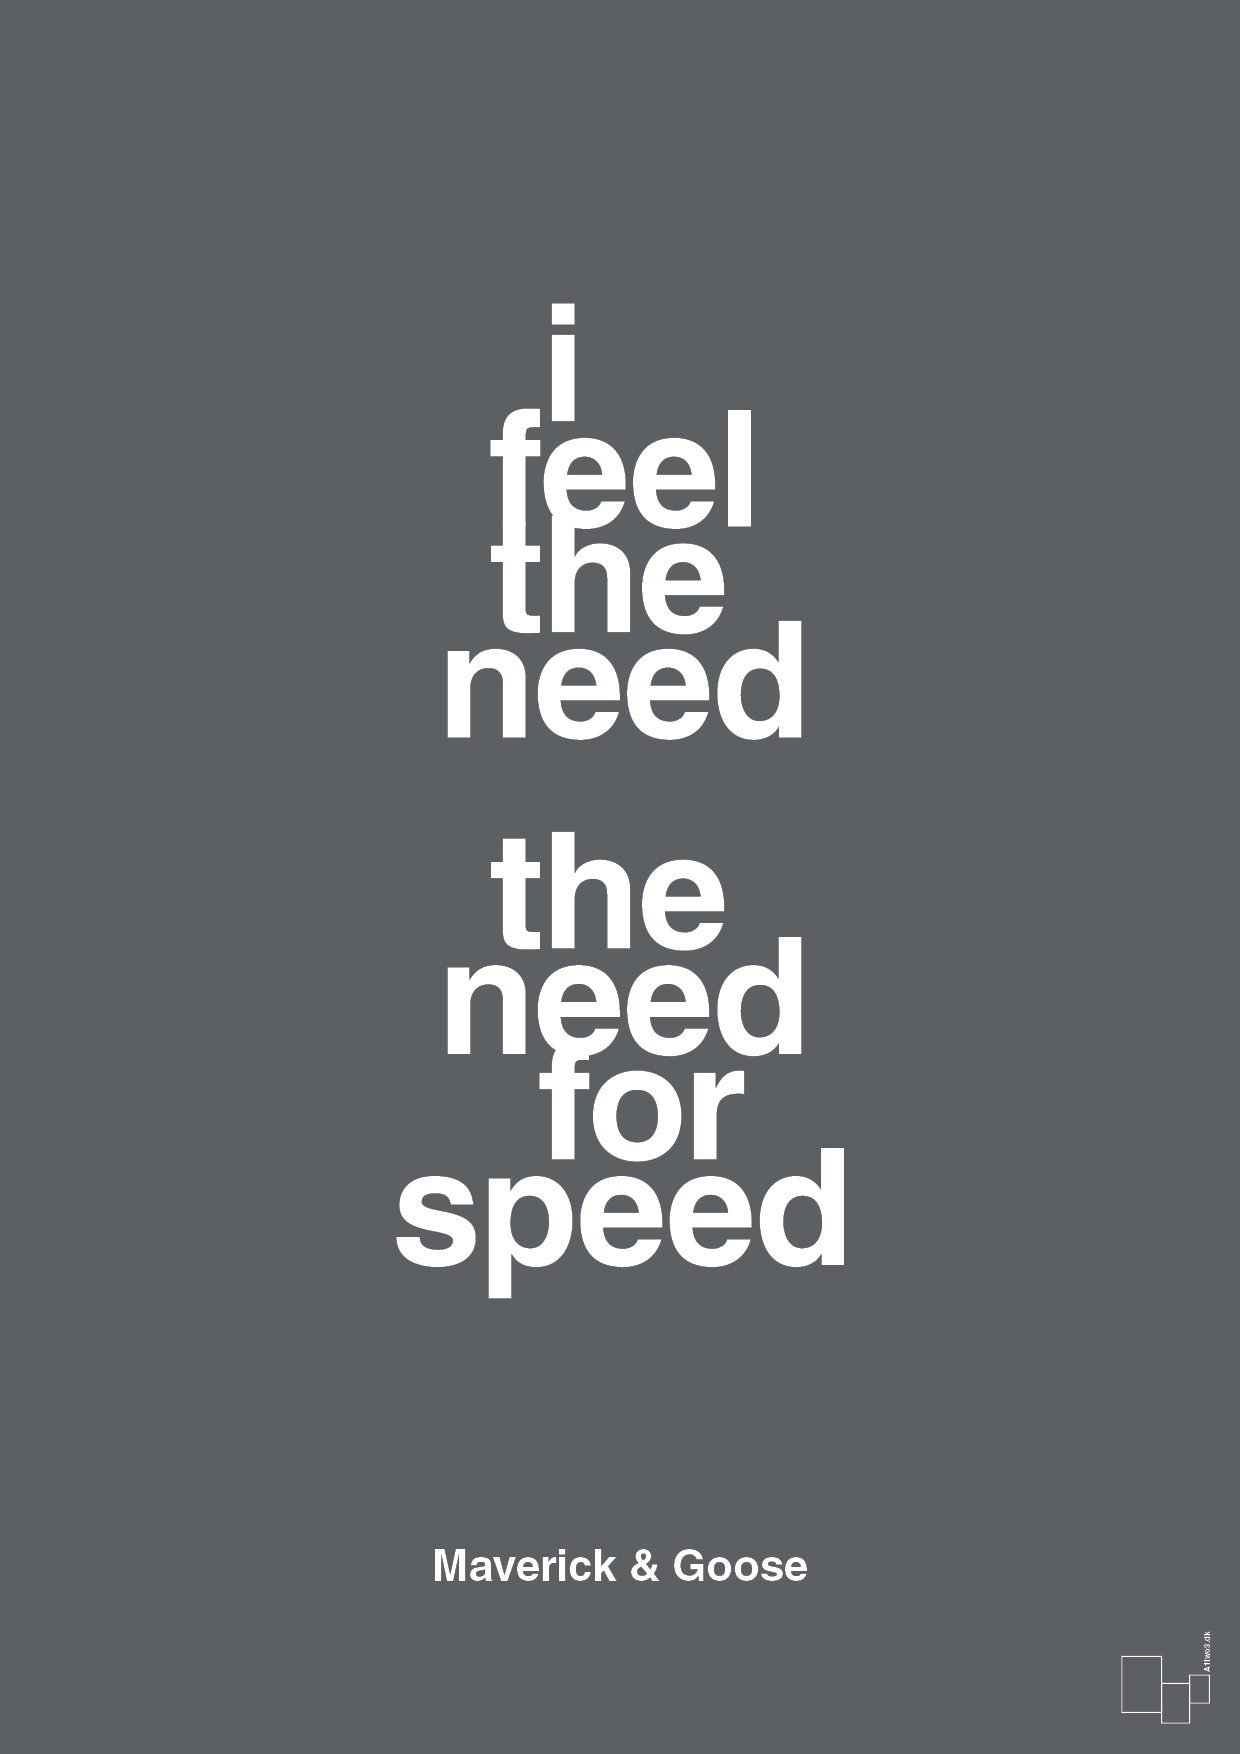 i feel the need the need for speed - Plakat med Citater i Graphic Charcoal